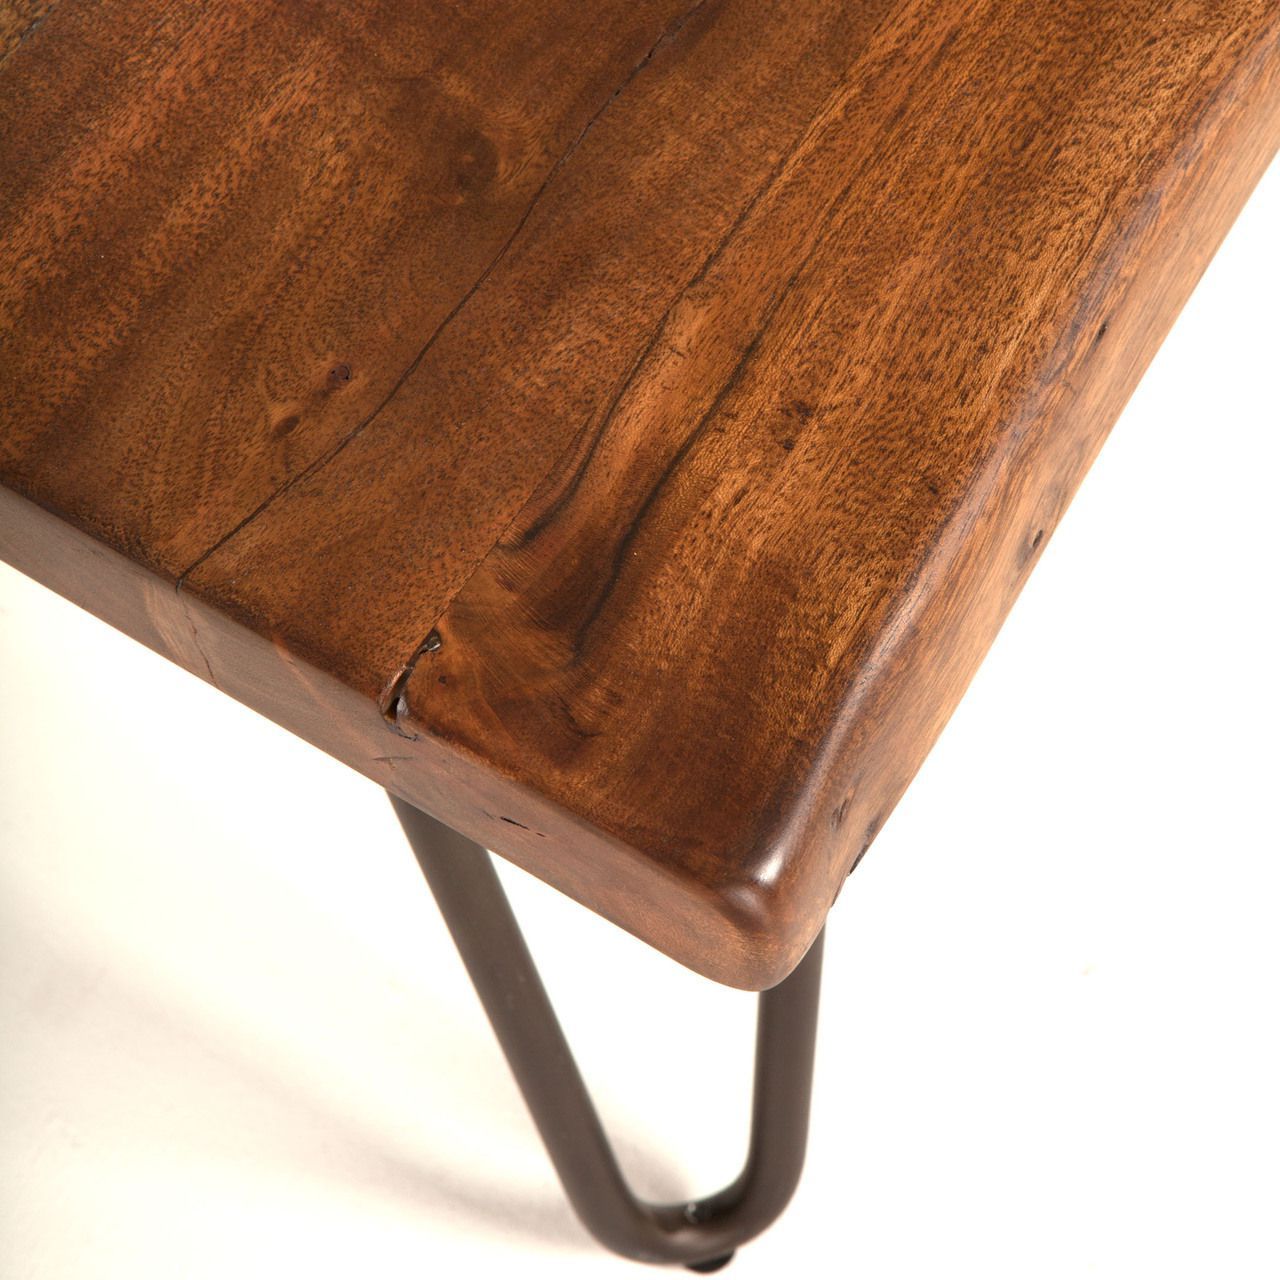 Coffee Tables With Solid Legs Within 2019 Vail Solid Wood Coffee Table In Walnut W/ Steel Legs (View 15 of 15)